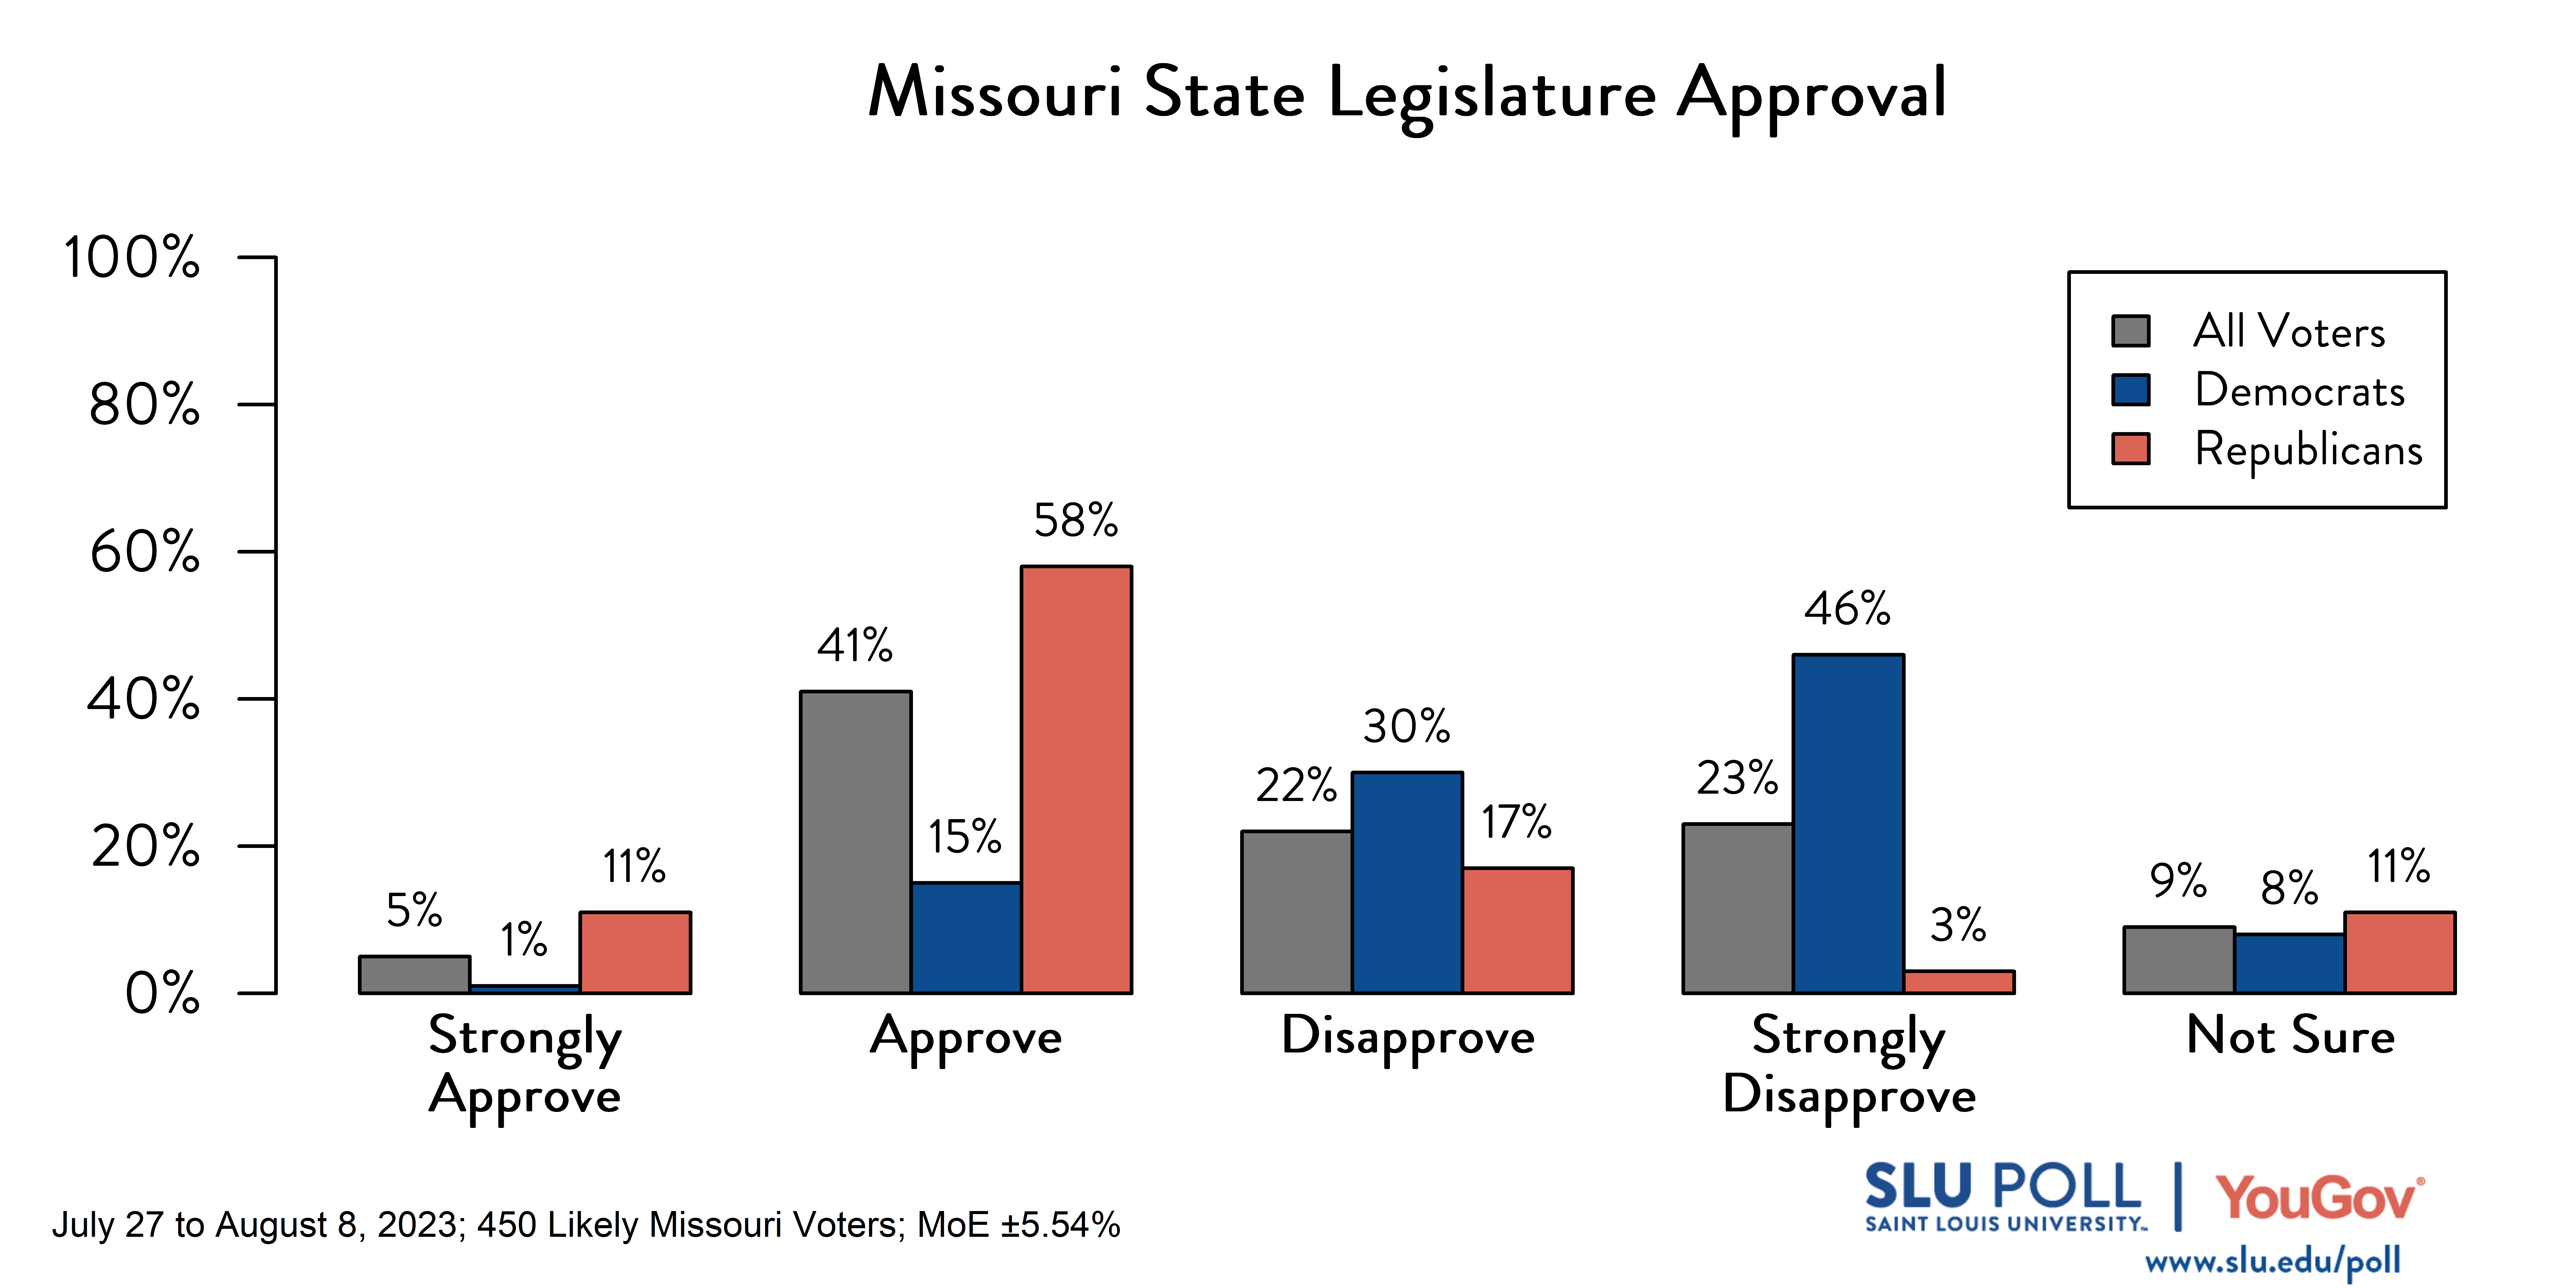 Likely voters' responses to 'Do you approve or disapprove of the way each is doing their job: The Missouri State Legislature?': 5% Strongly approve, 41% Approve, 22% Disapprove, 23% Strongly disapprove, and 9% Not sure. Democratic voters' responses: ' 1% Strongly approve, 15% Approve, 30% Disapprove, 46% Strongly disapprove, and 8% Not sure. Republican voters' responses: 11% Strongly approve, 58% Approve, 17% Disapprove, 3% Strongly disapprove, and 11% Not sure.